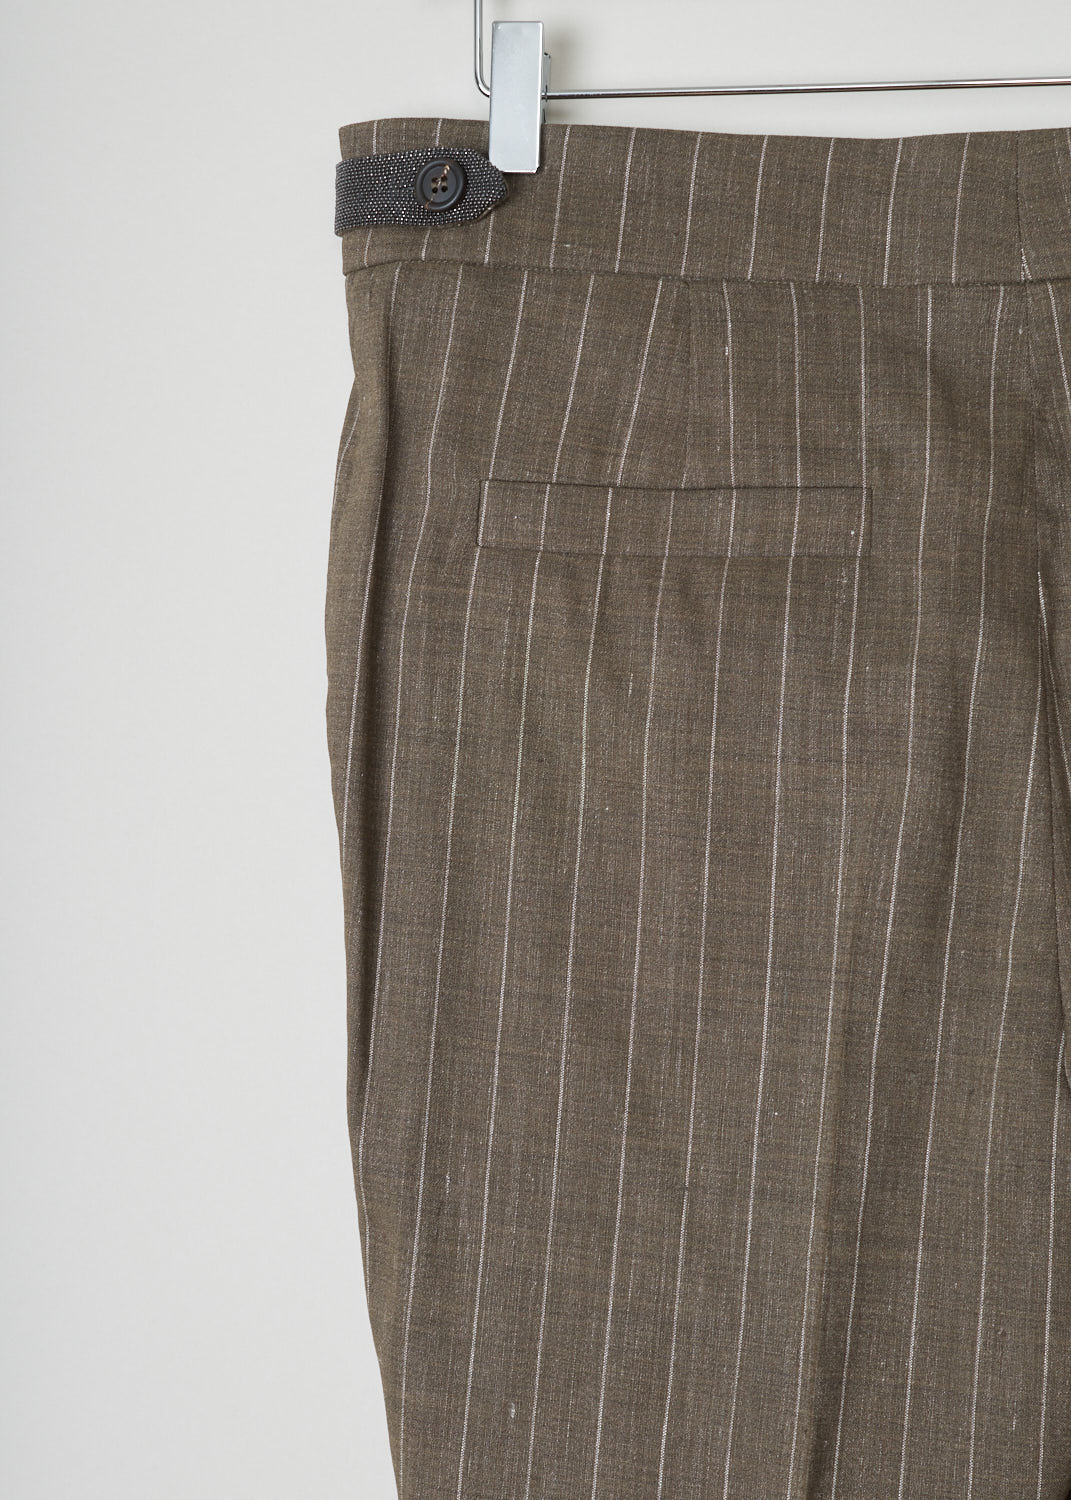 Brunello Cucinelli, Khaki pinstripe pants, MF554P6492_C005, green white, detail, Khaki pinstripe pants, comes without belt loops, but with monili fasteners. Made with a single pleat and forward slanted pockets. On the back it has welt pockets. Comes with a cropped length. As fastening option this model has a zipper, an metal clip and a backing button. 